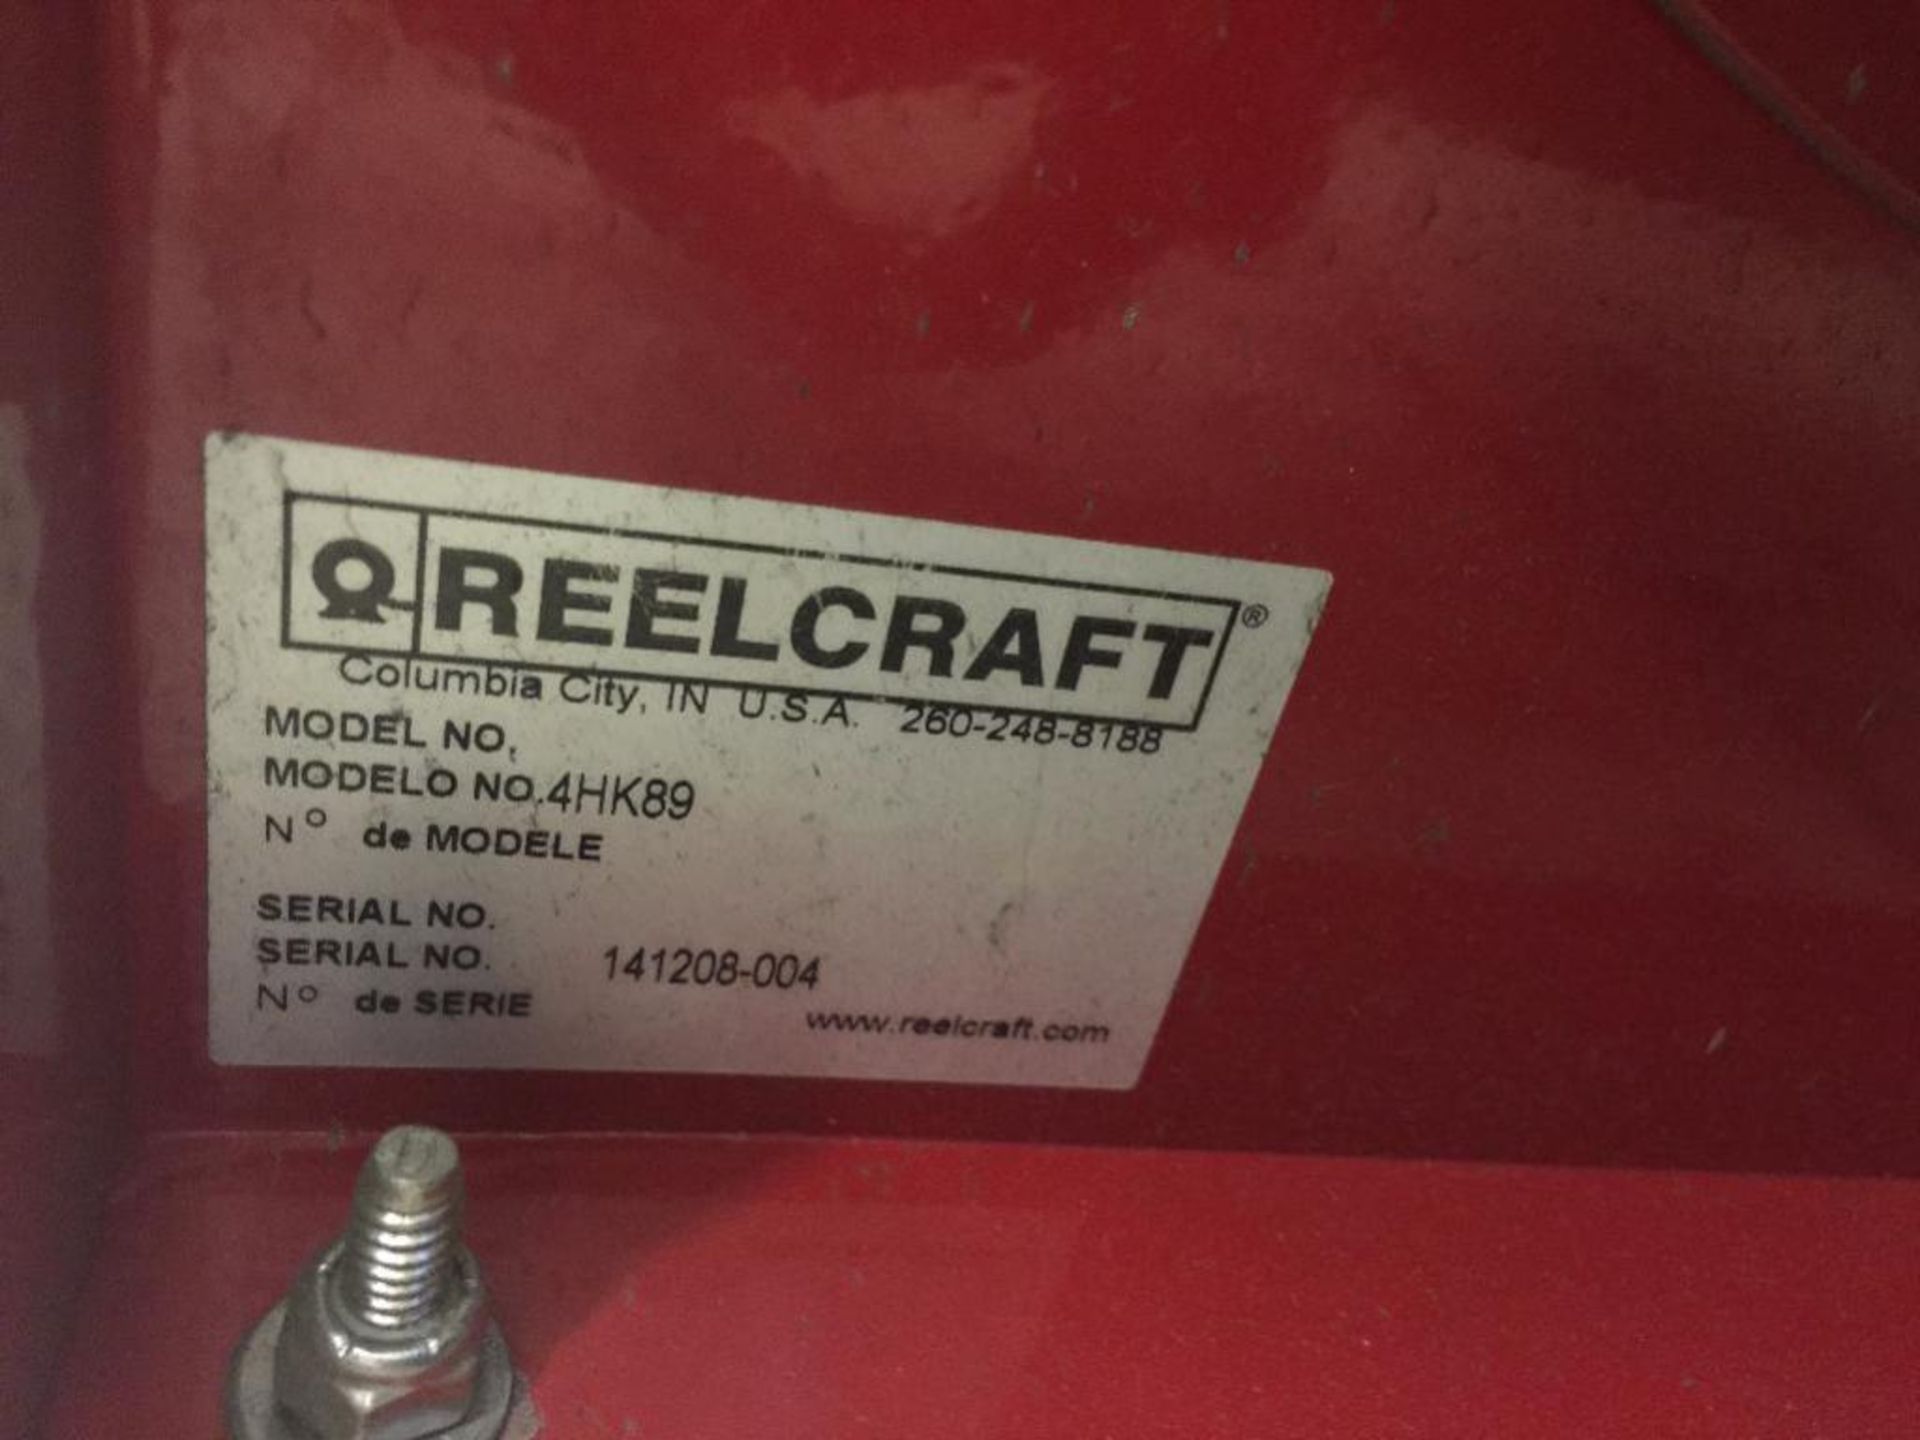 Reelcraft retractable hose reel, with air hose ** Rigging Fee: $15 ** - Image 3 of 3